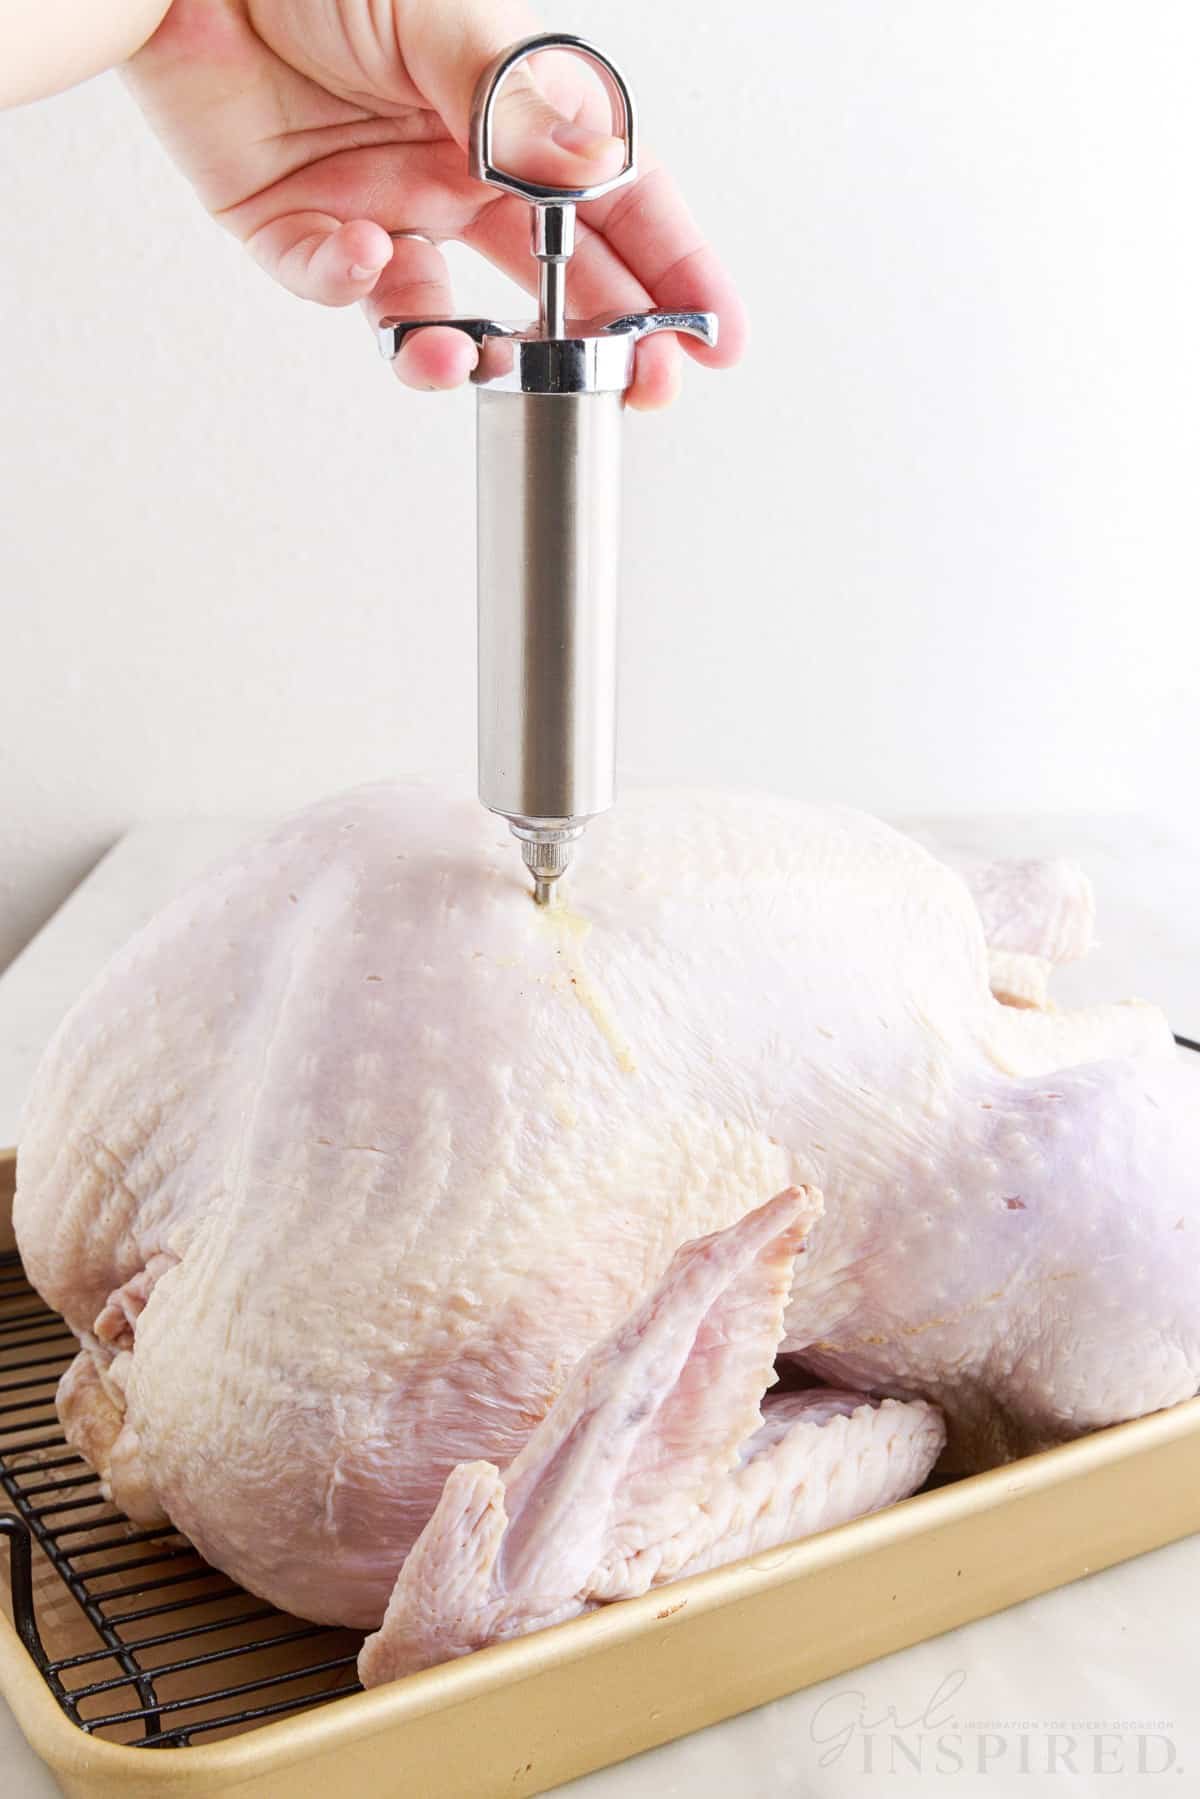 injector inserted in a turkey on a roasting pan